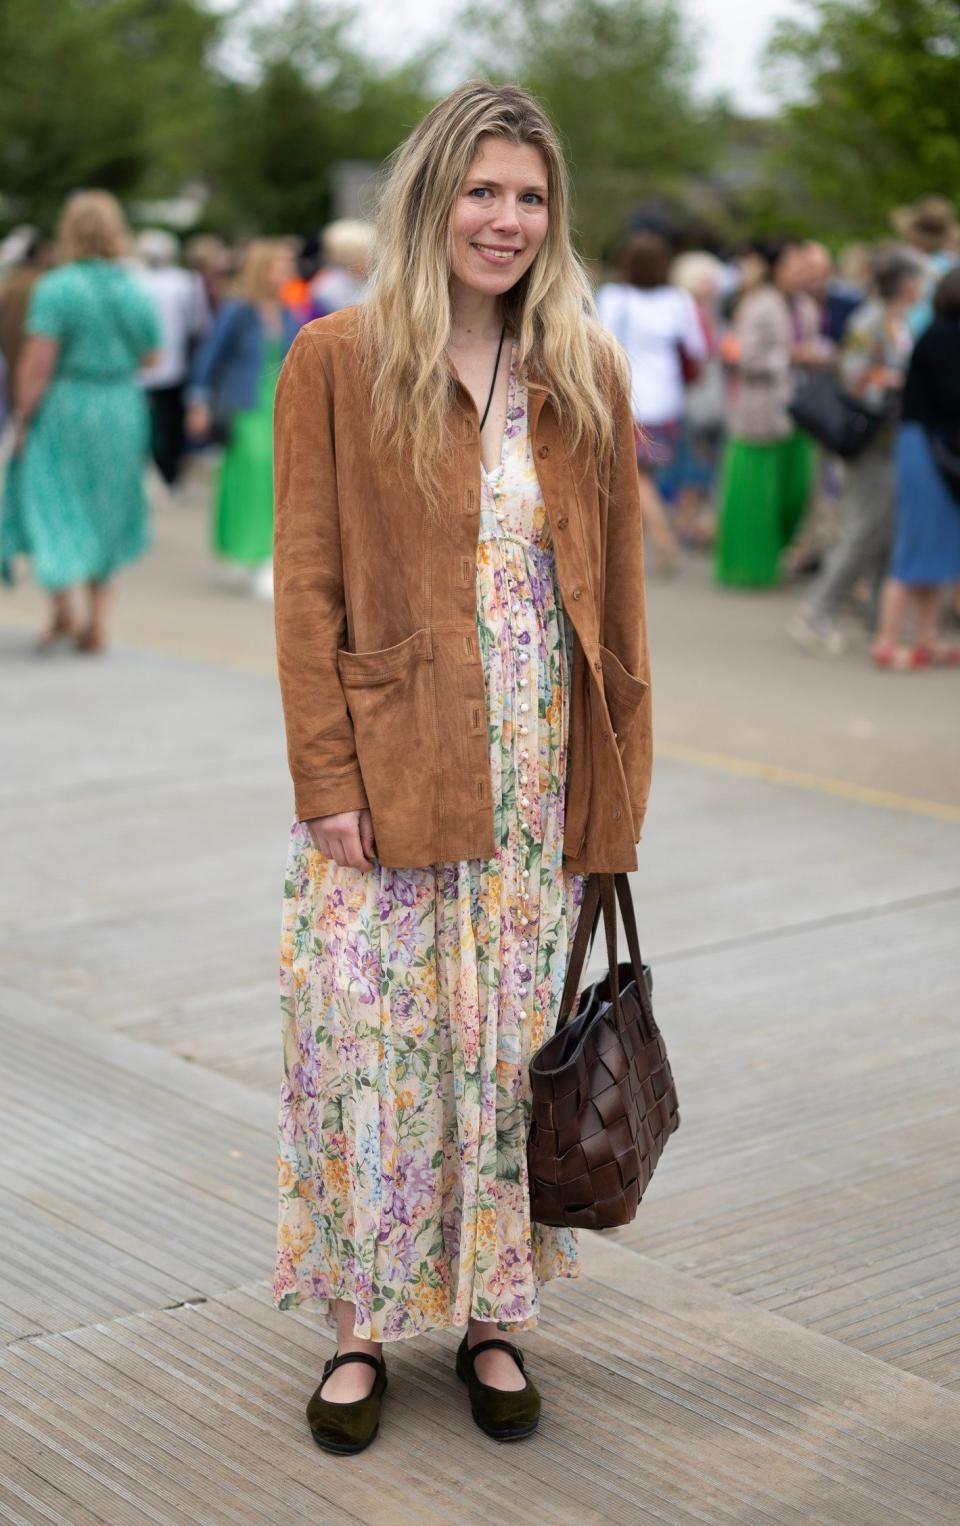 Charlotte Ford, 36, wears a suede jacket from Sezane with a floral dress by Zimmermann. Her flat shoes are Vibi Venezia and her bag is Dragon Diffusion